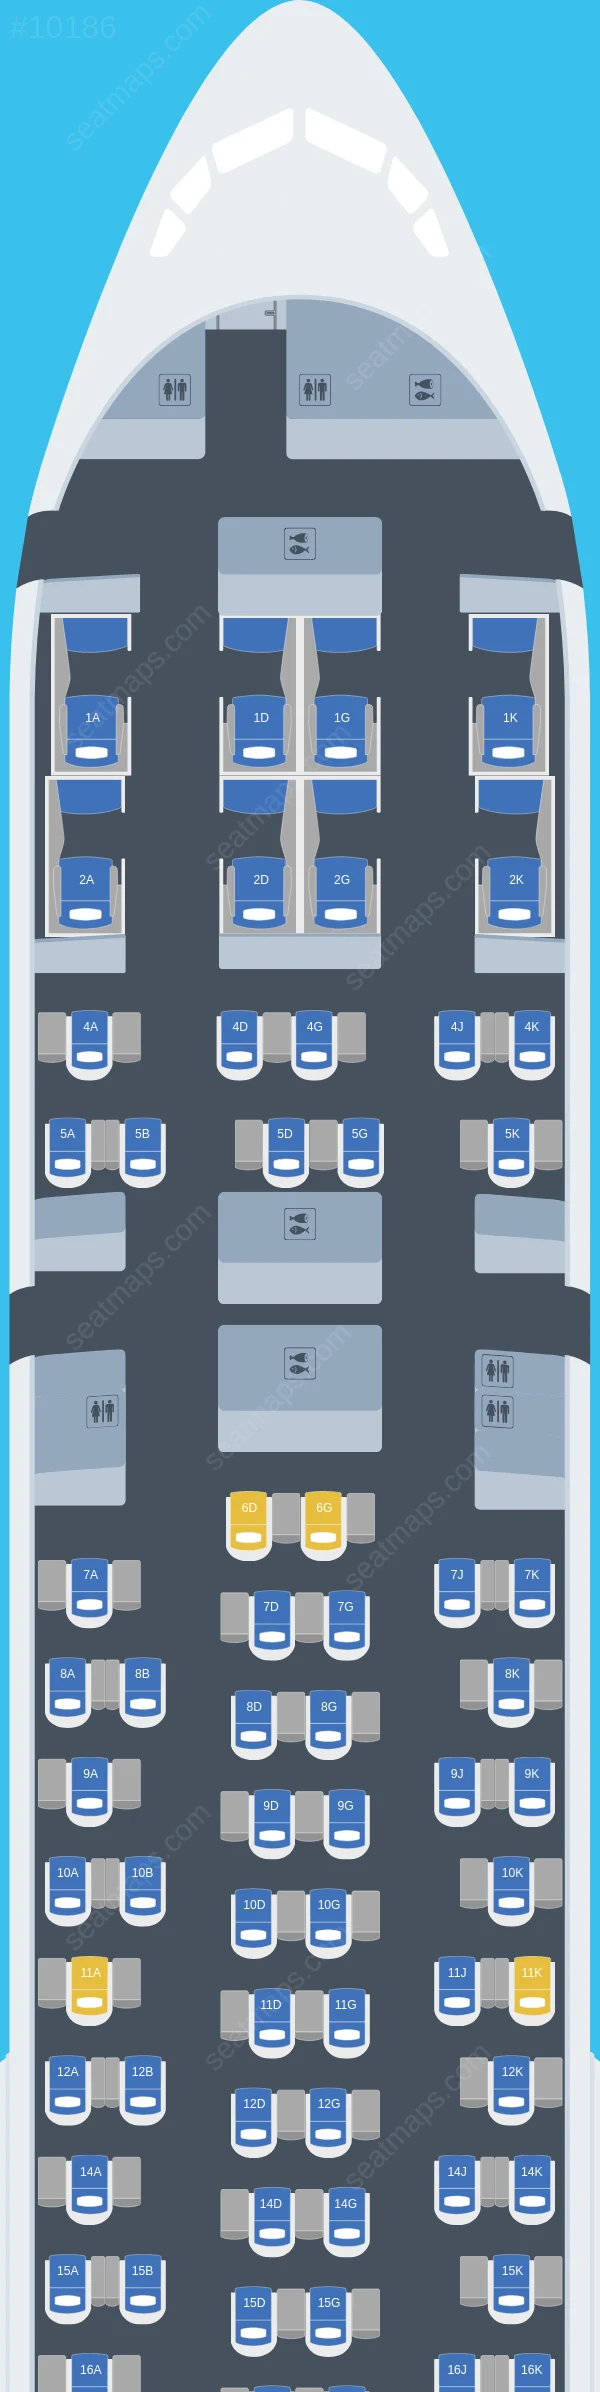 Swiss Boeing 777-300ER seatmap preview